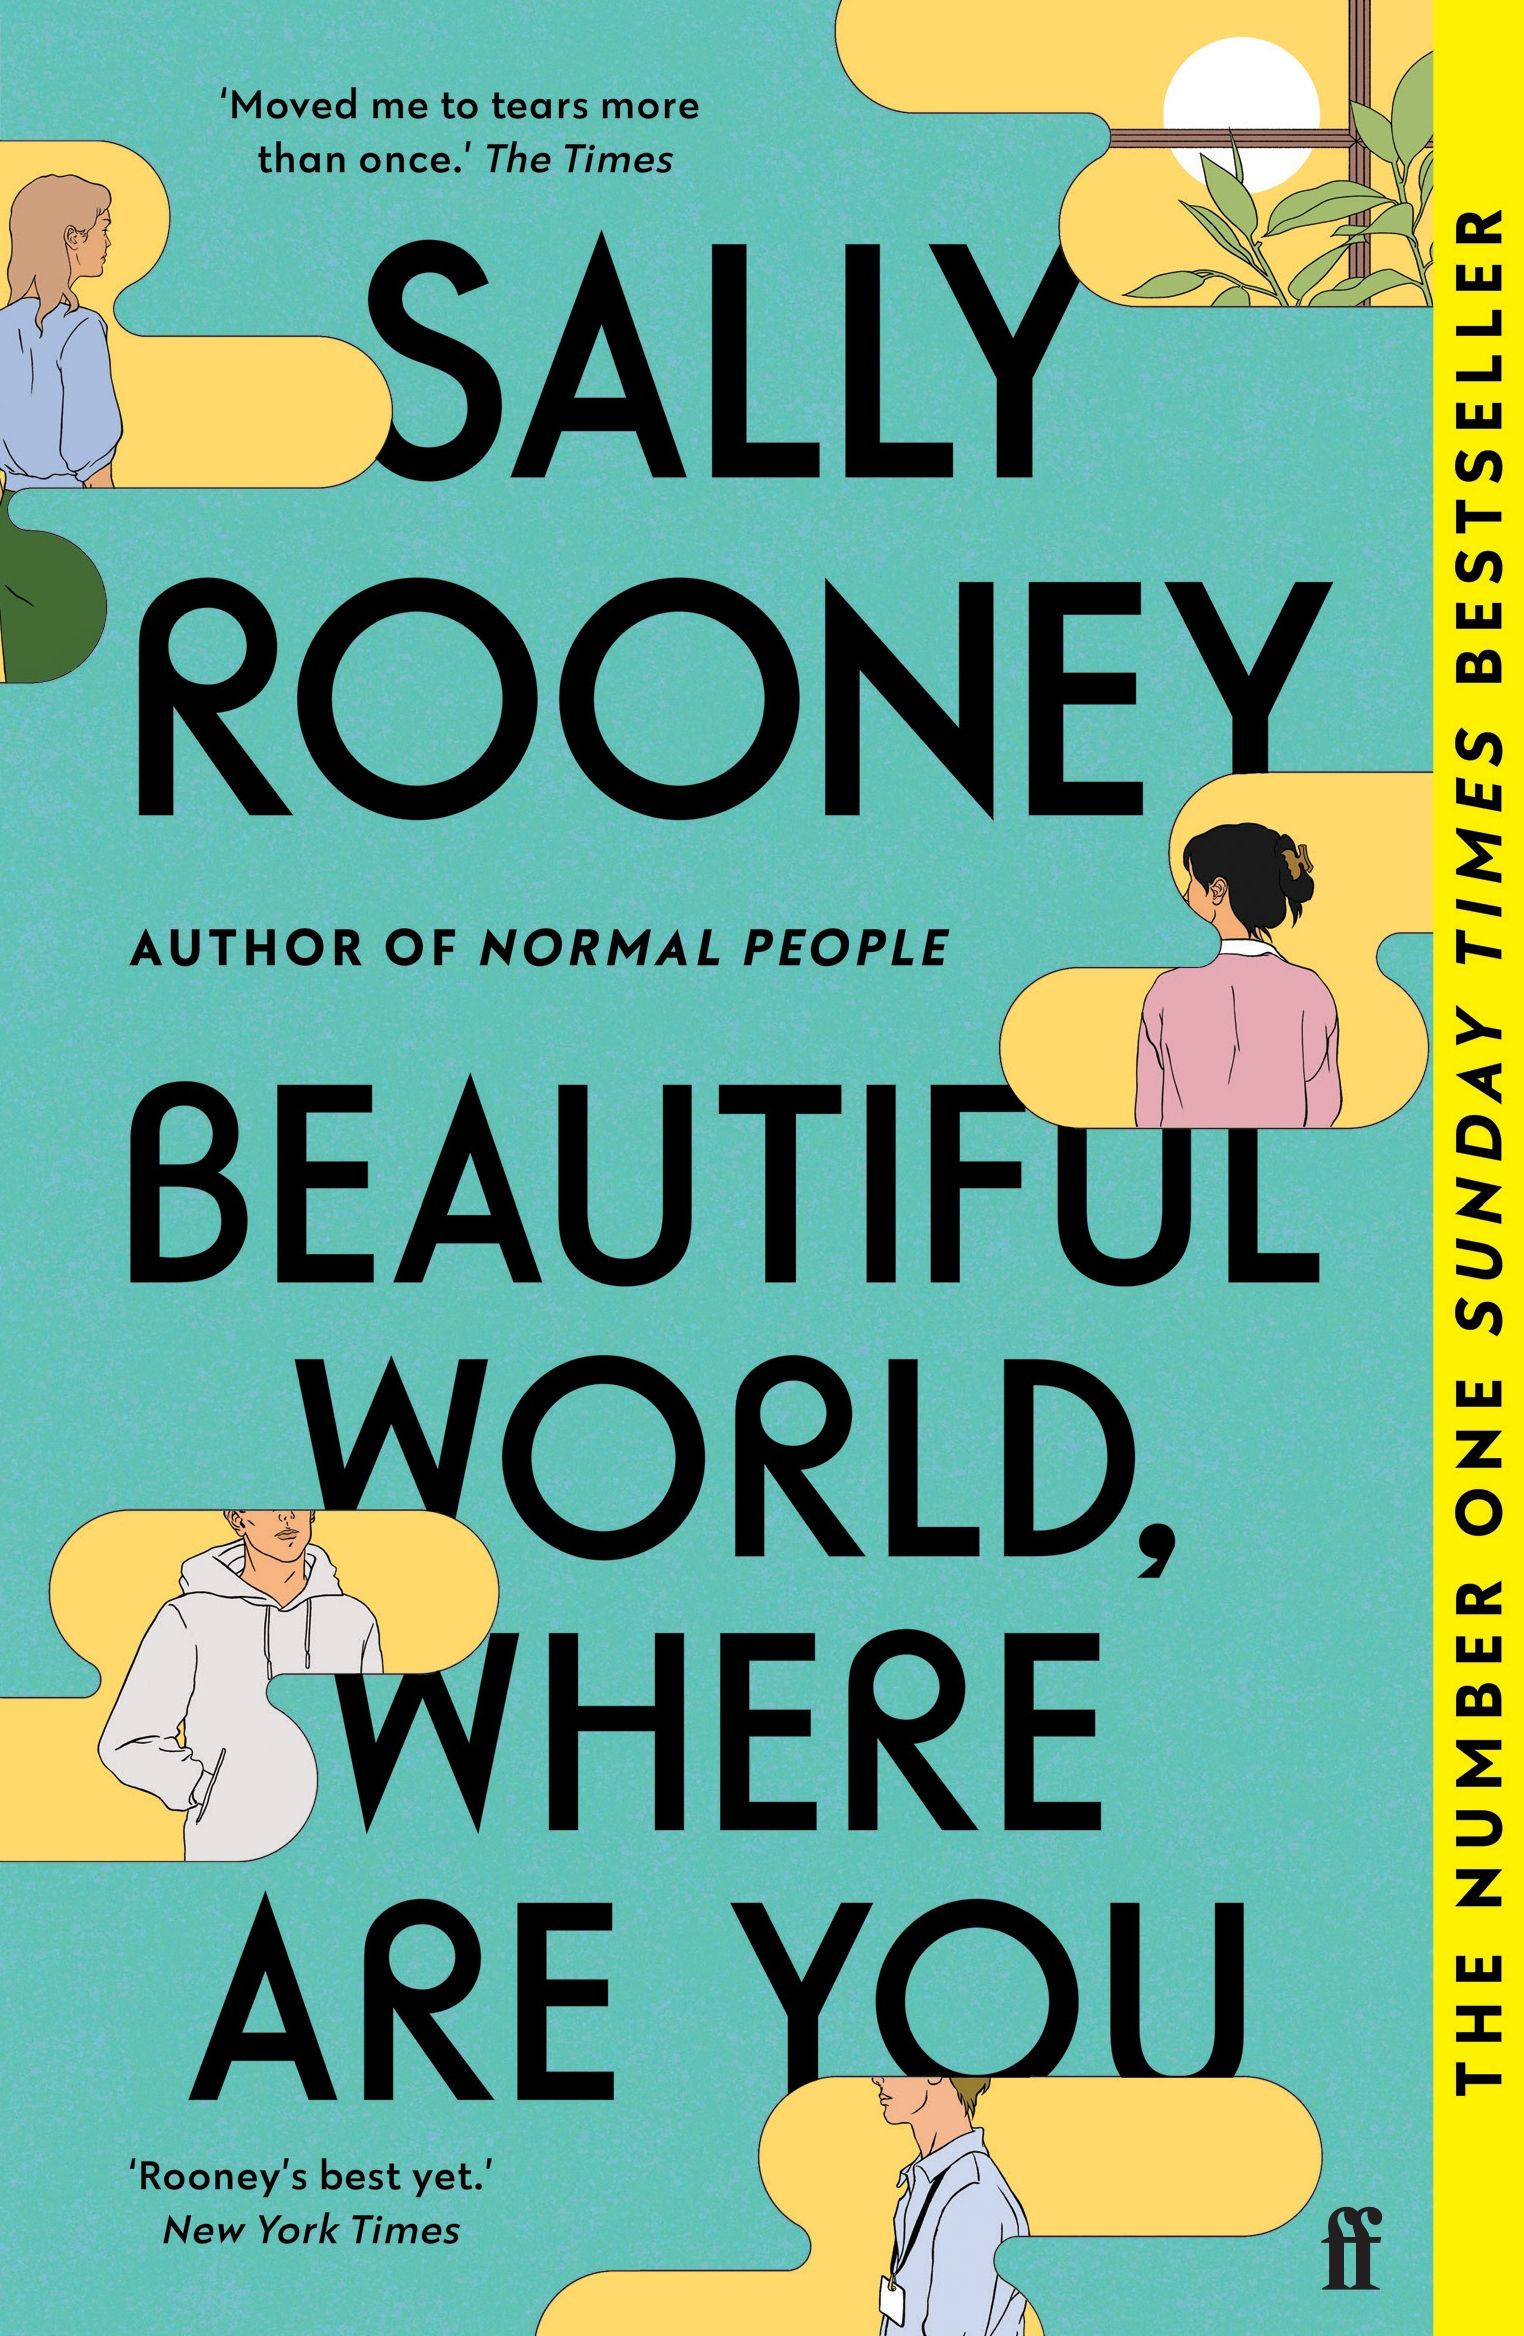 NETWORK: Sally Rooney\'s latest work resonates again with readers